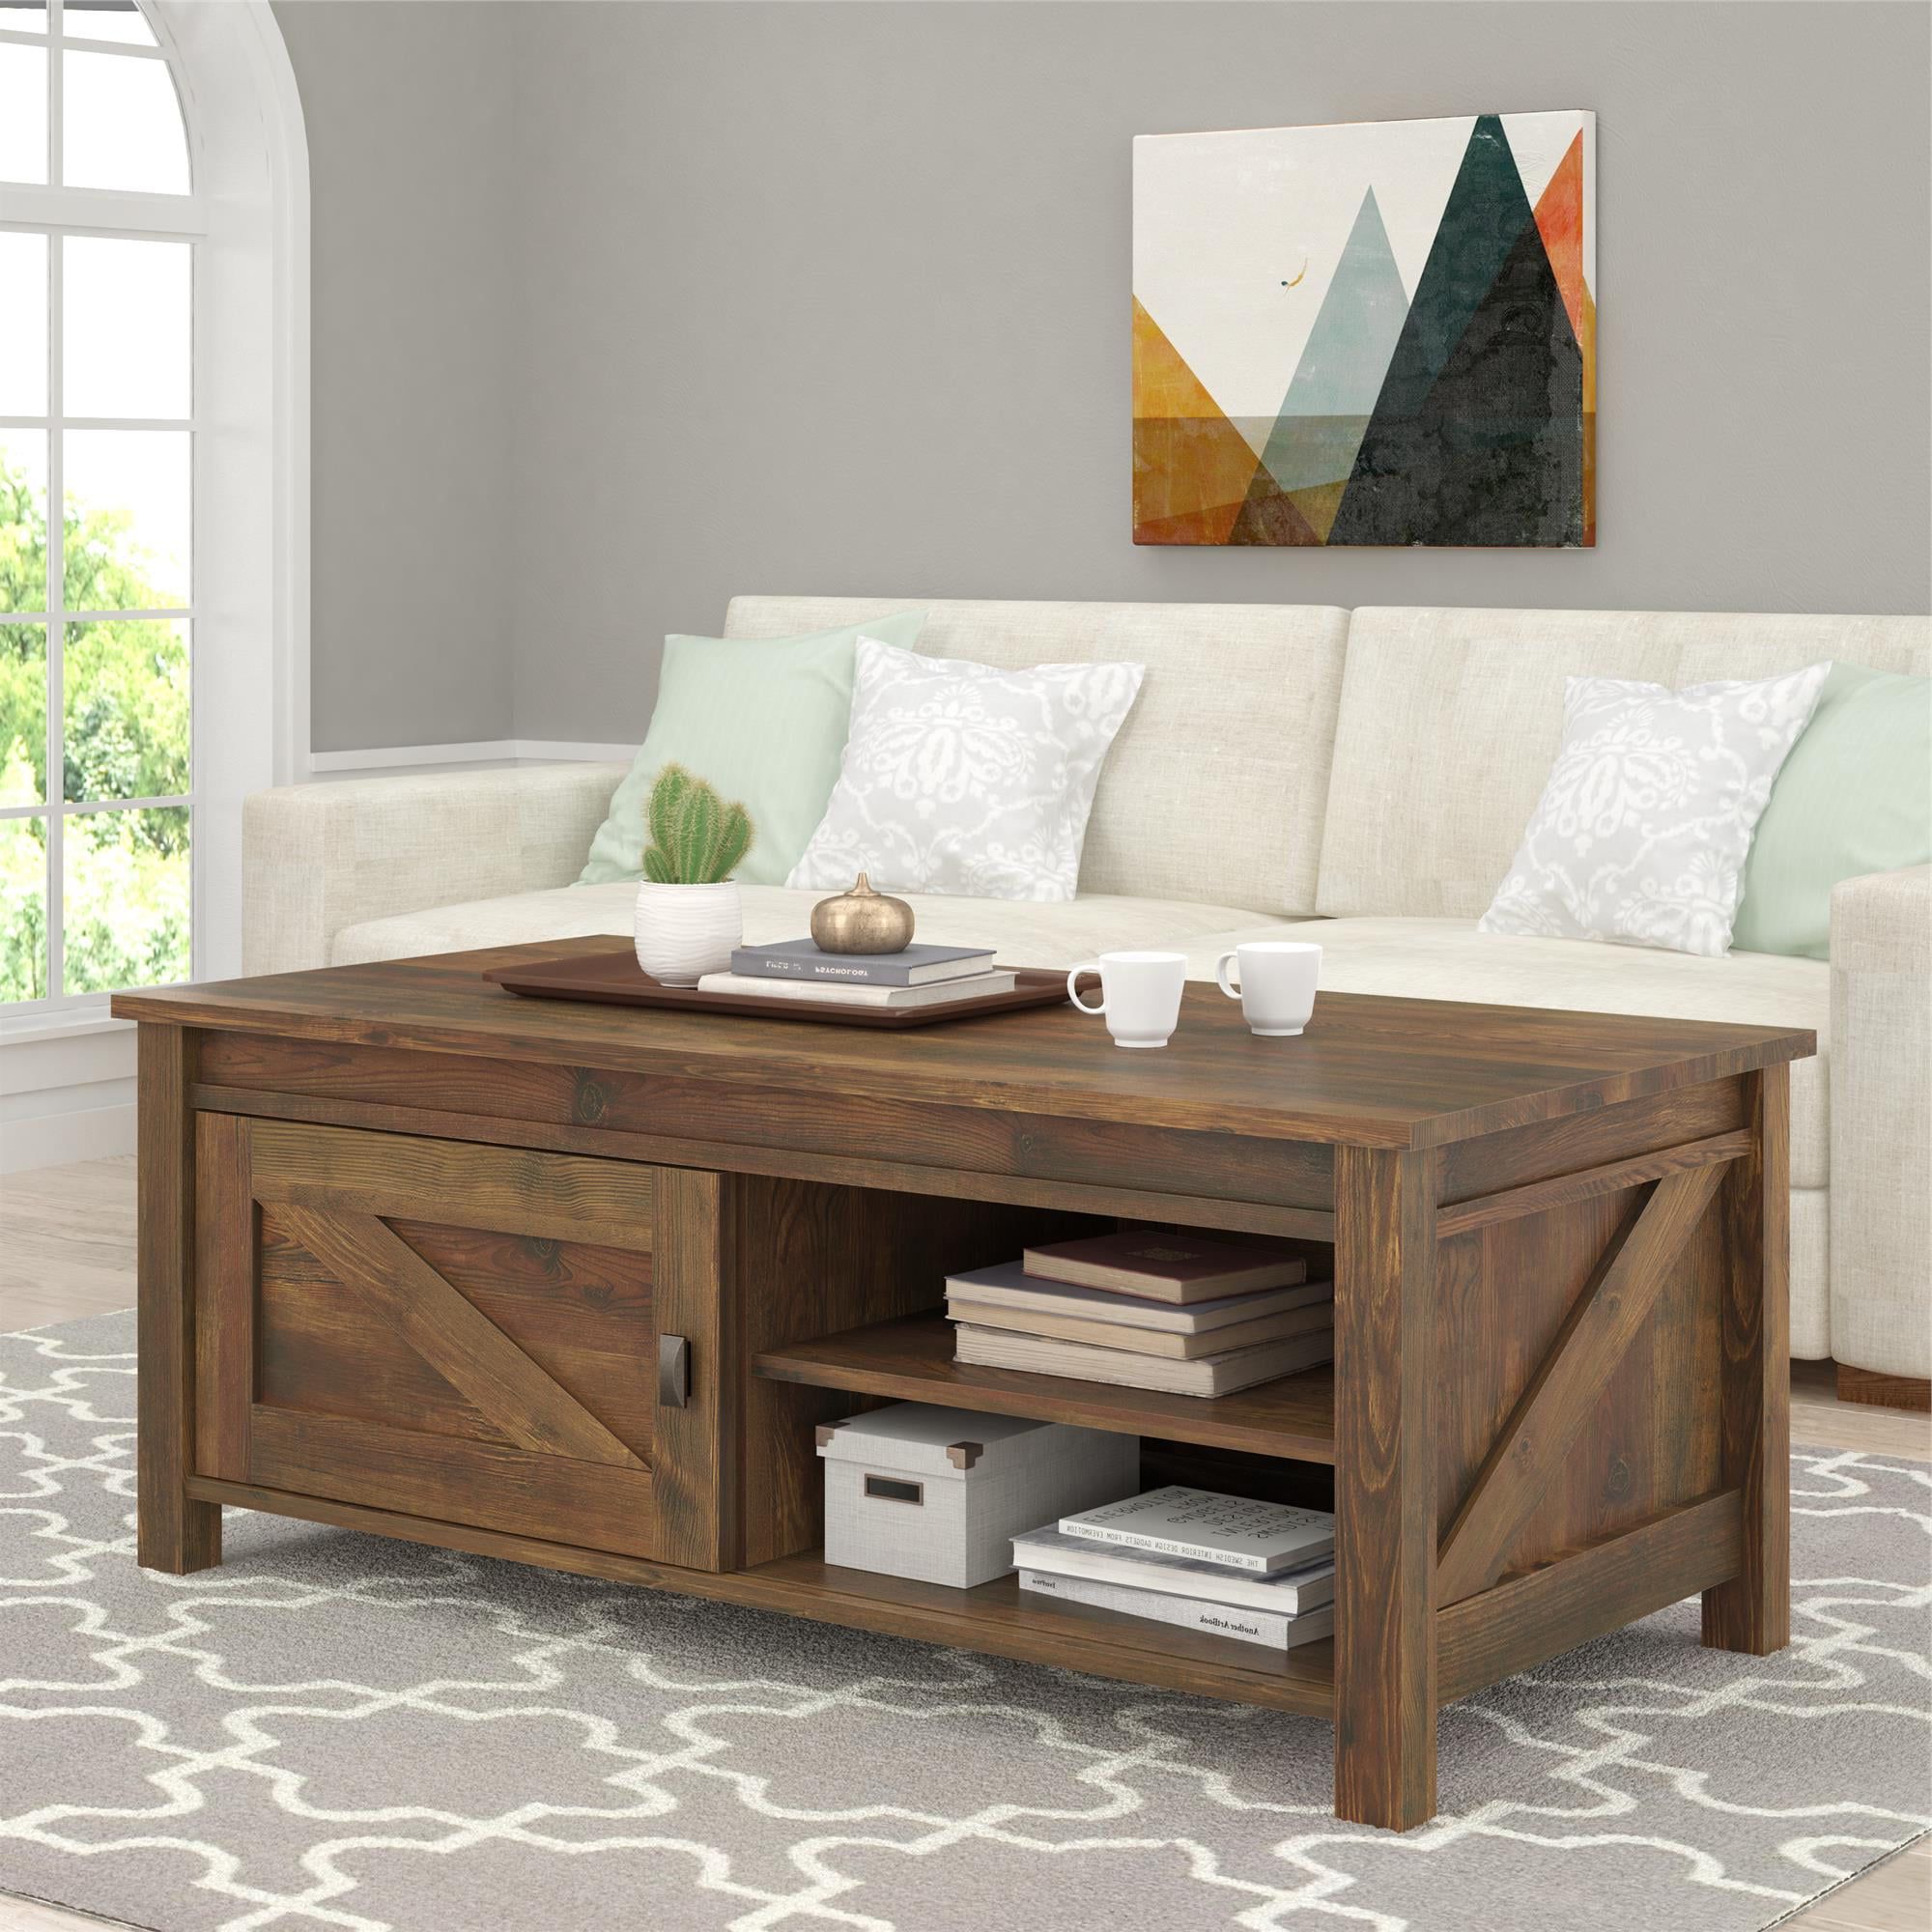 Most Recently Released Ameriwood Home Farmington Coffee Table, Rustic – Walmart Pertaining To Rustic Coffee Tables (View 5 of 15)